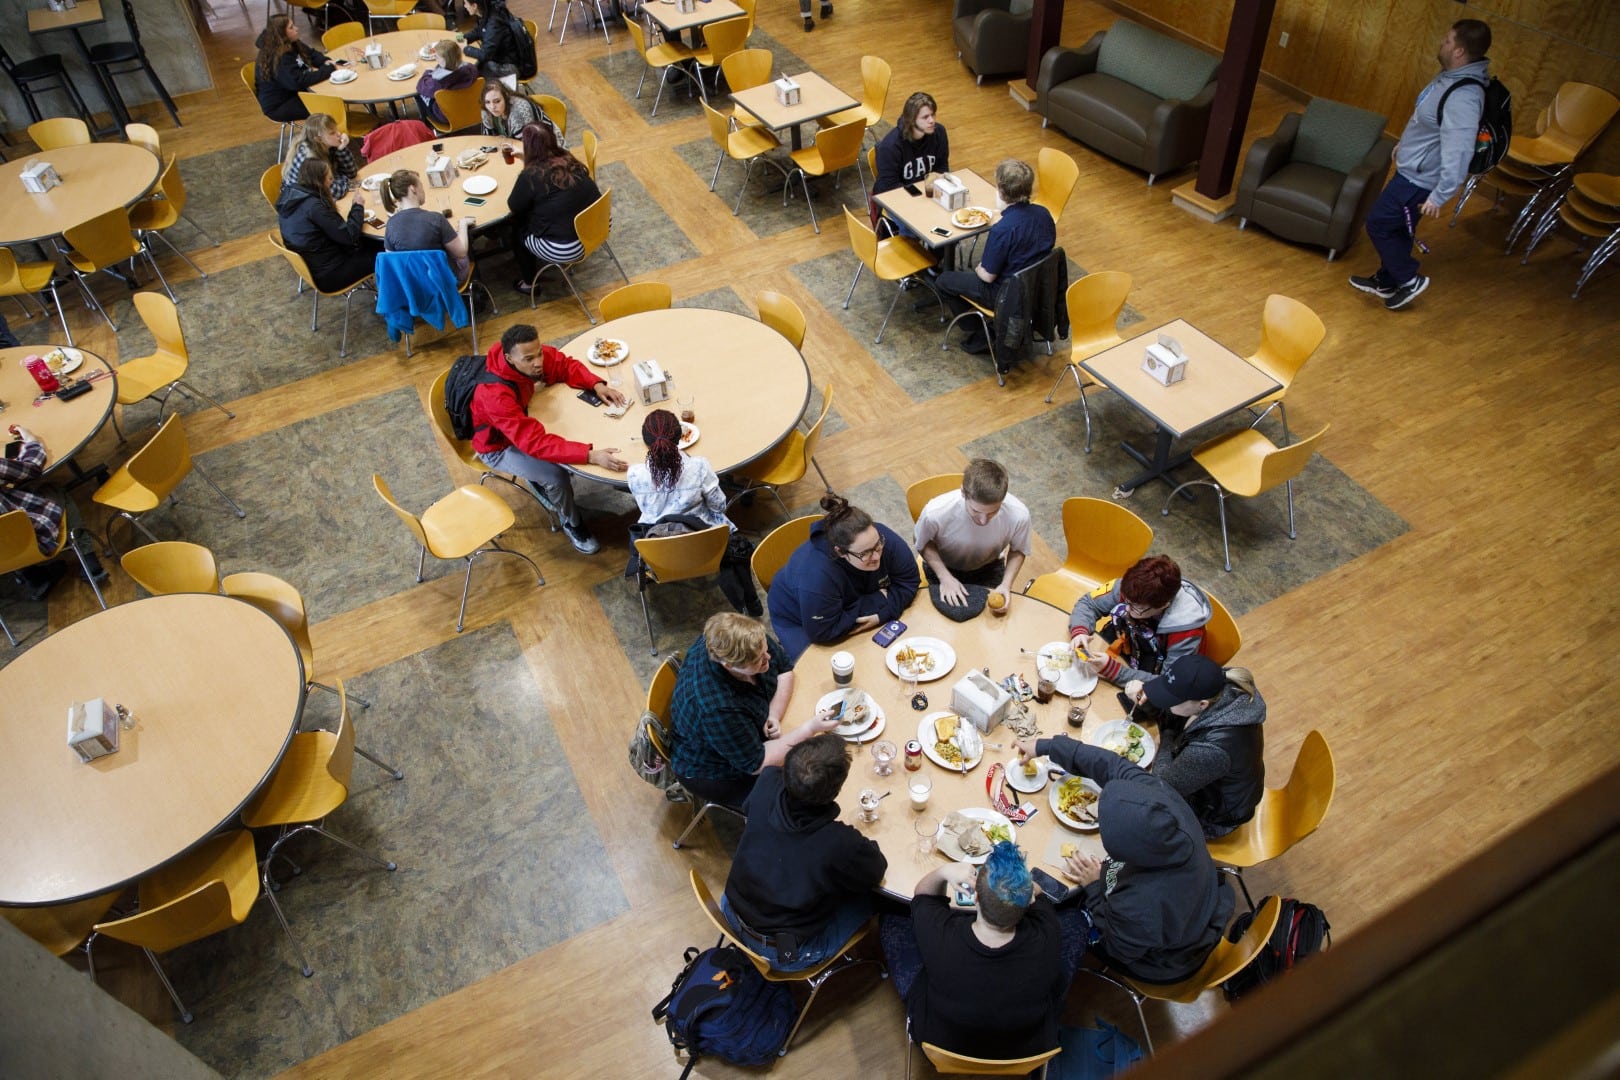 A downward view of the Vermont State University Johnson dining hall as students eat.